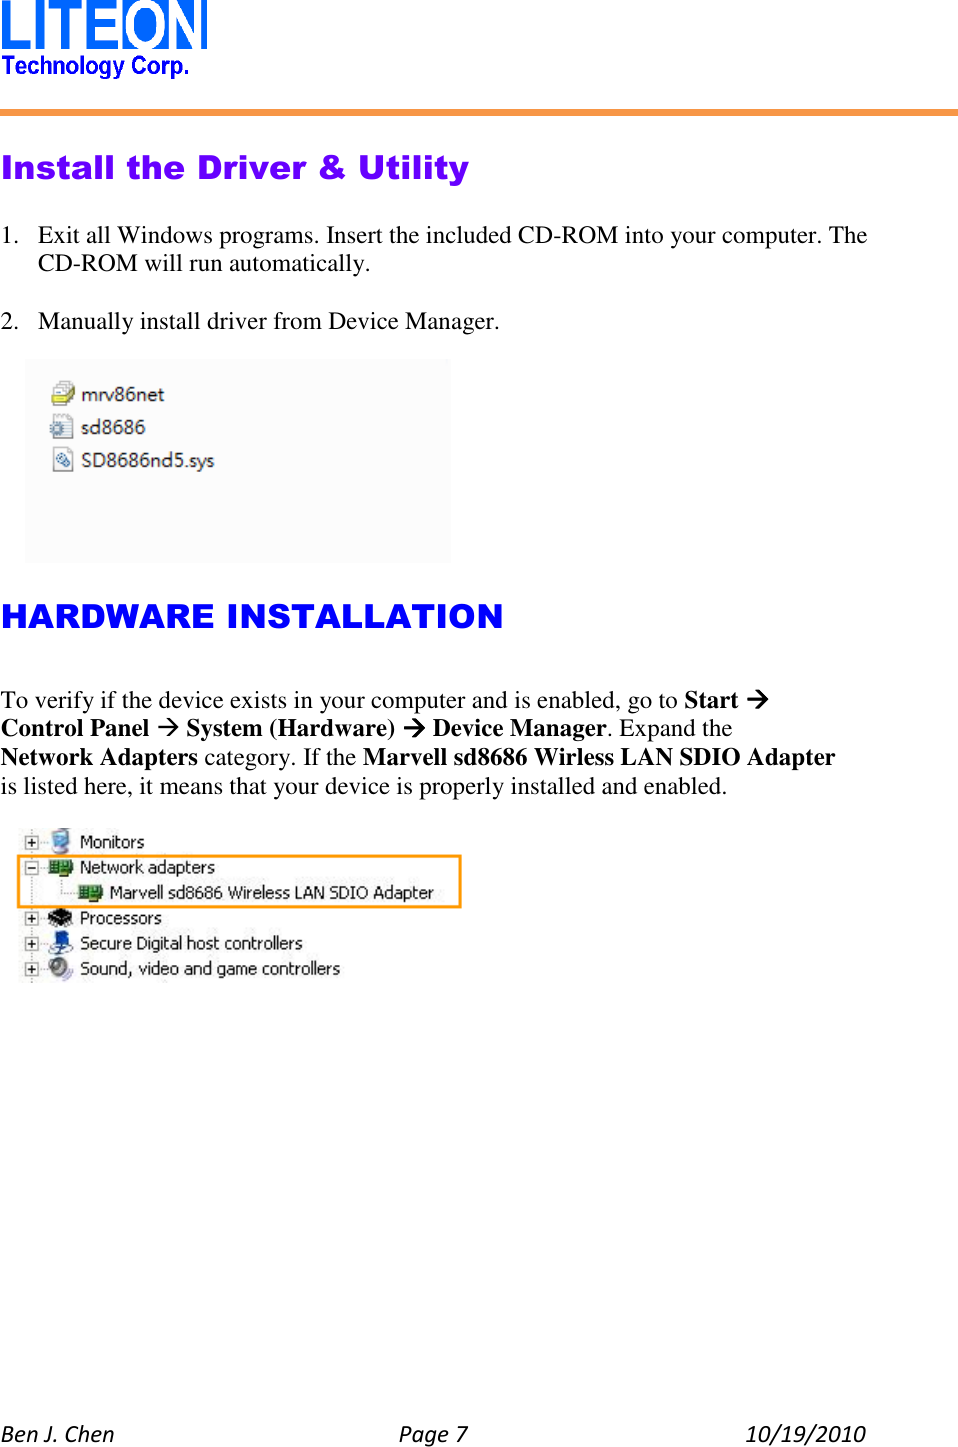   Ben J. Chen  Page 7  10/19/2010    Install the Driver &amp; Utility  1. Exit all Windows programs. Insert the included CD-ROM into your computer. The CD-ROM will run automatically.  2. Manually install driver from Device Manager.    HARDWARE INSTALLATION  To verify if the device exists in your computer and is enabled, go to Start  Control Panel  System (Hardware)  Device Manager. Expand the Network Adapters category. If the Marvell sd8686 Wirless LAN SDIO Adapter is listed here, it means that your device is properly installed and enabled.    